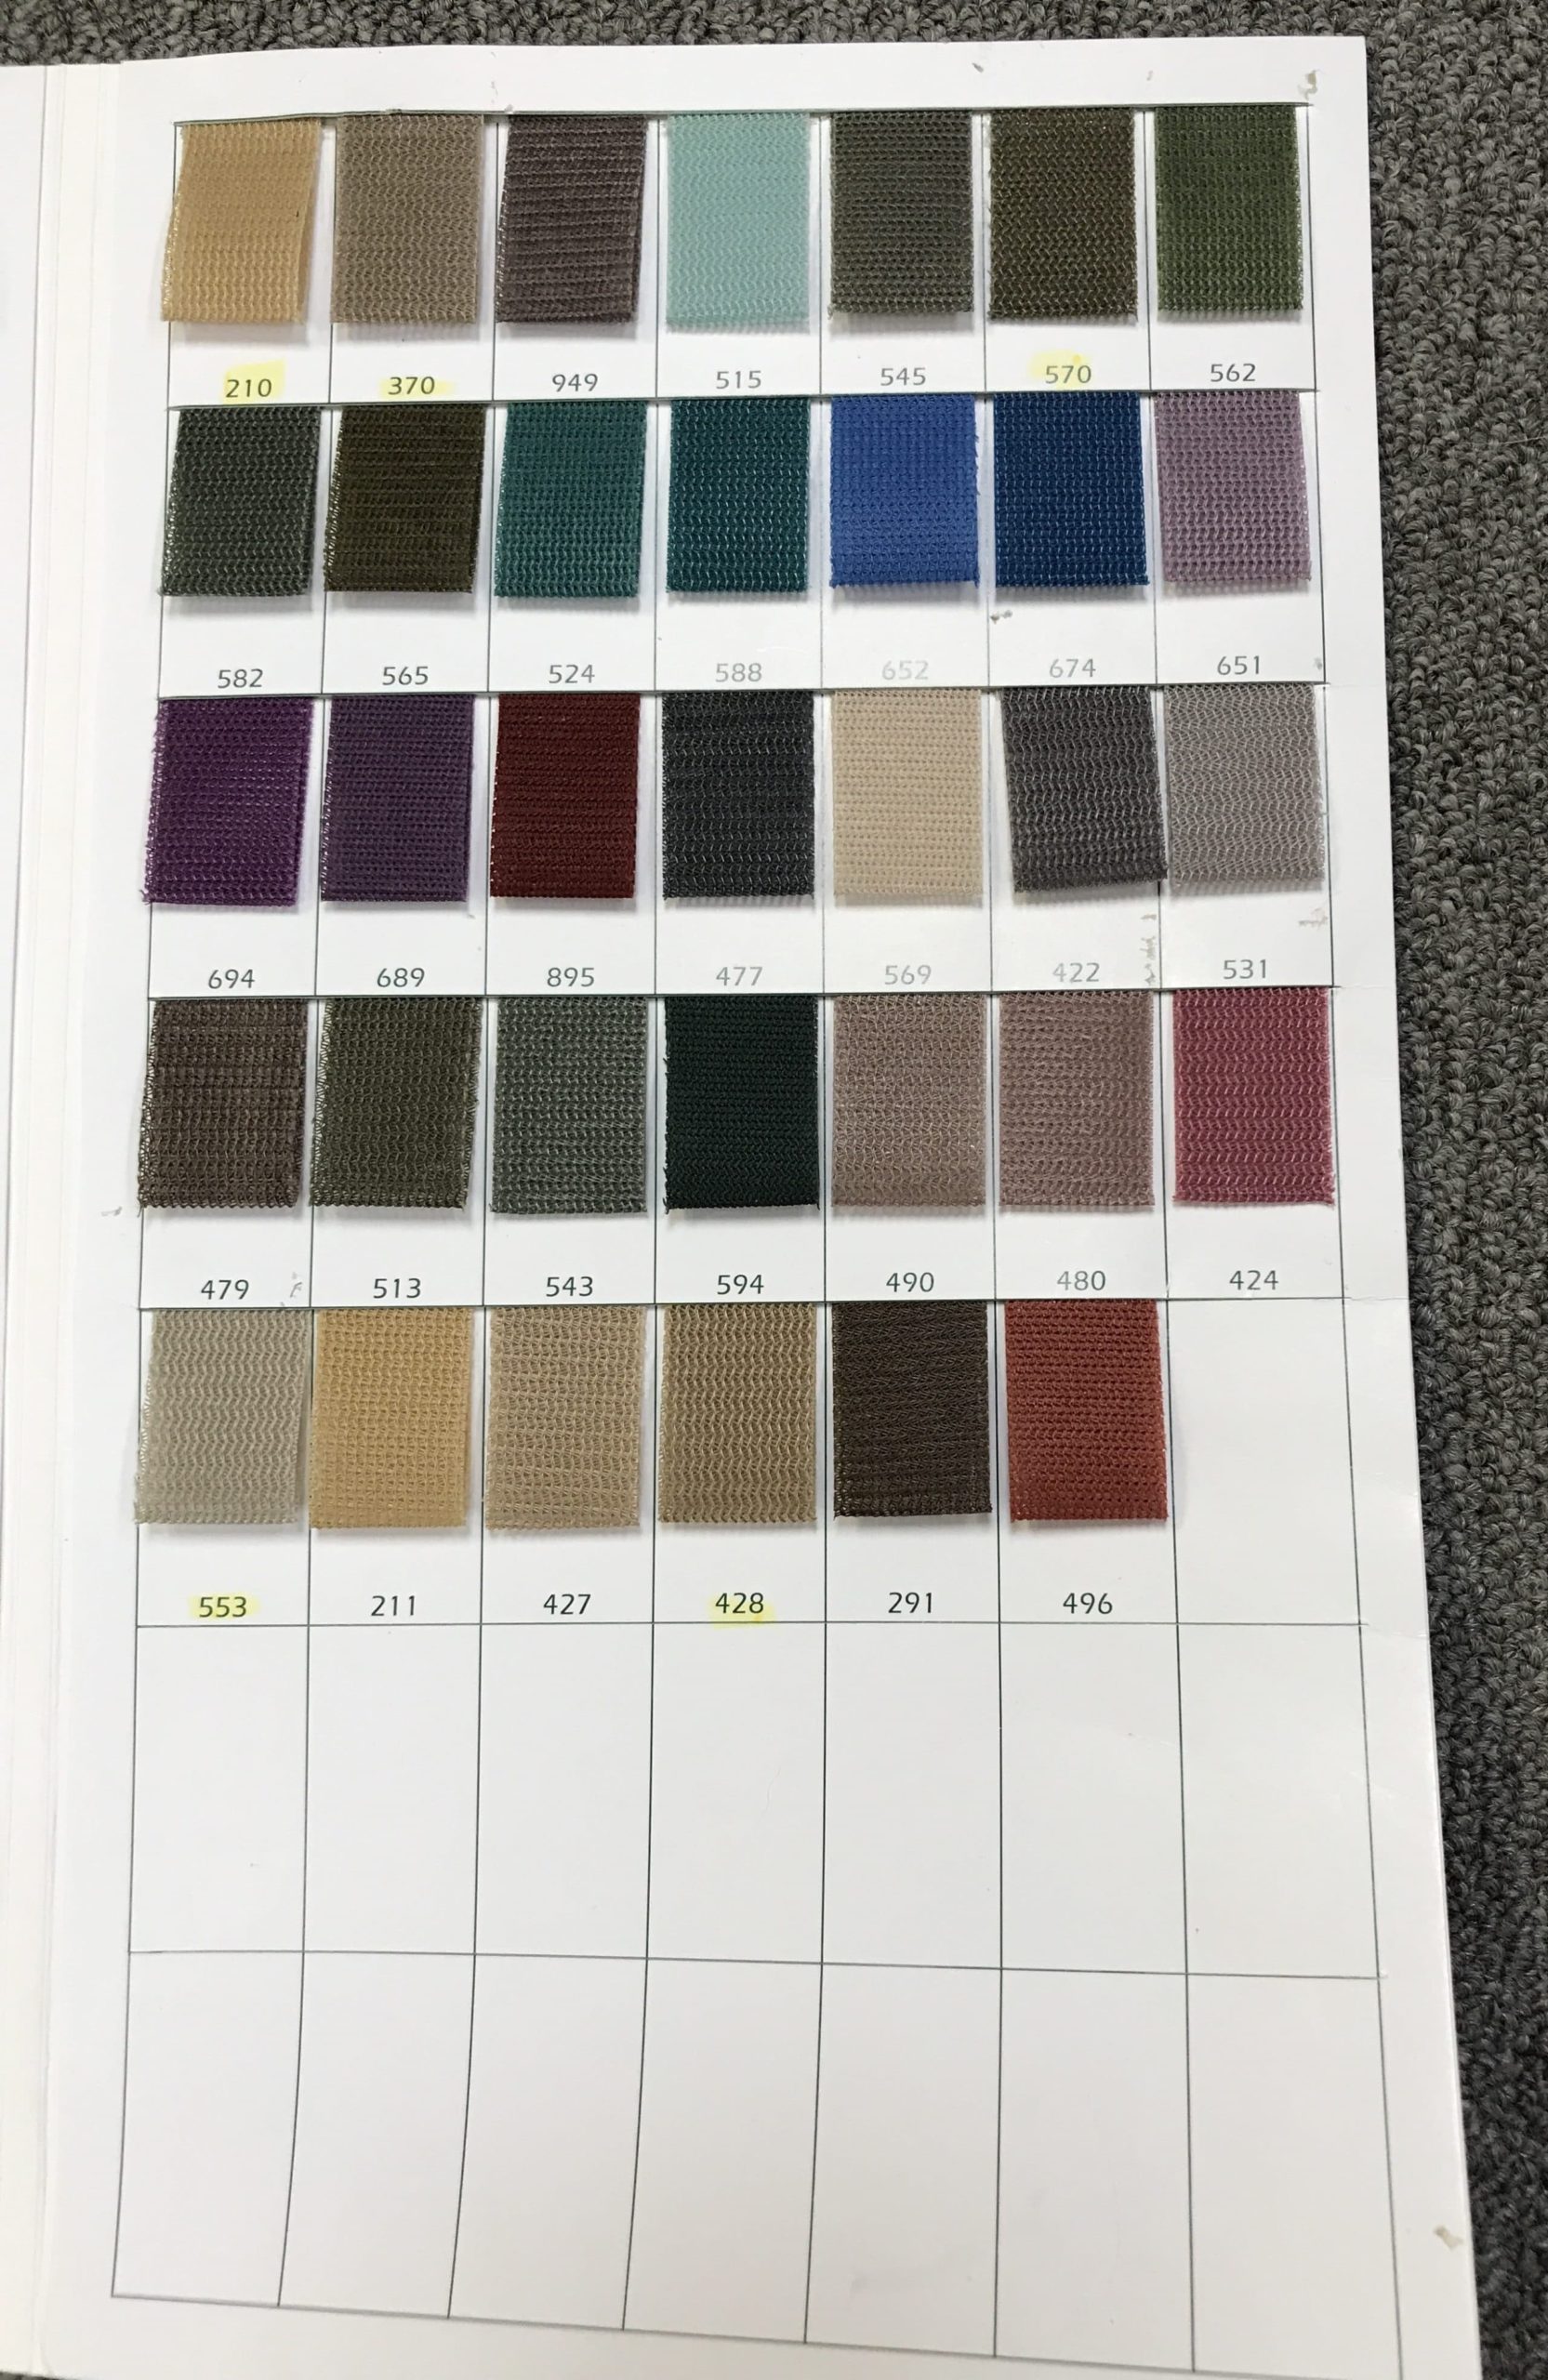 Instabind Regular Style & 3 syn/cotton Sample Chart - Bond Products Inc